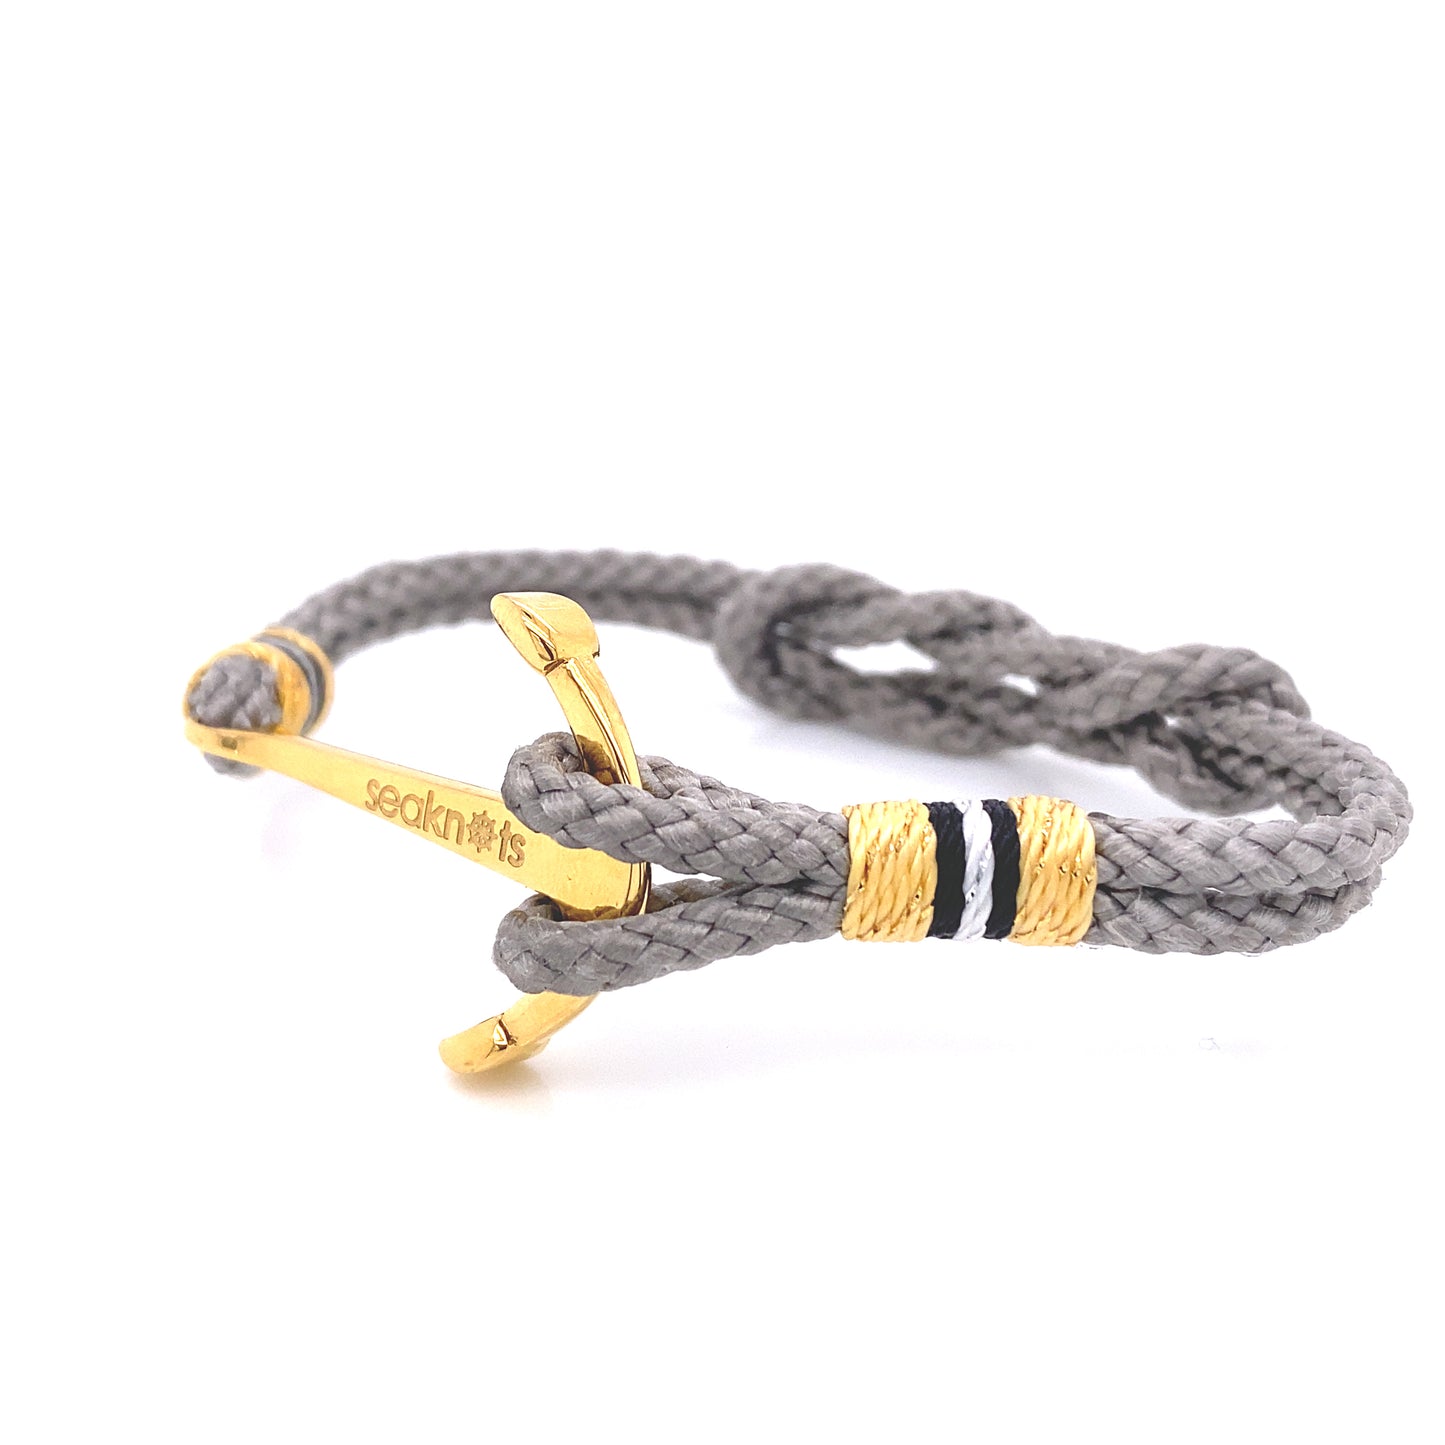 DOUBLE CORD ANCHOR | Seaknots | Luby 